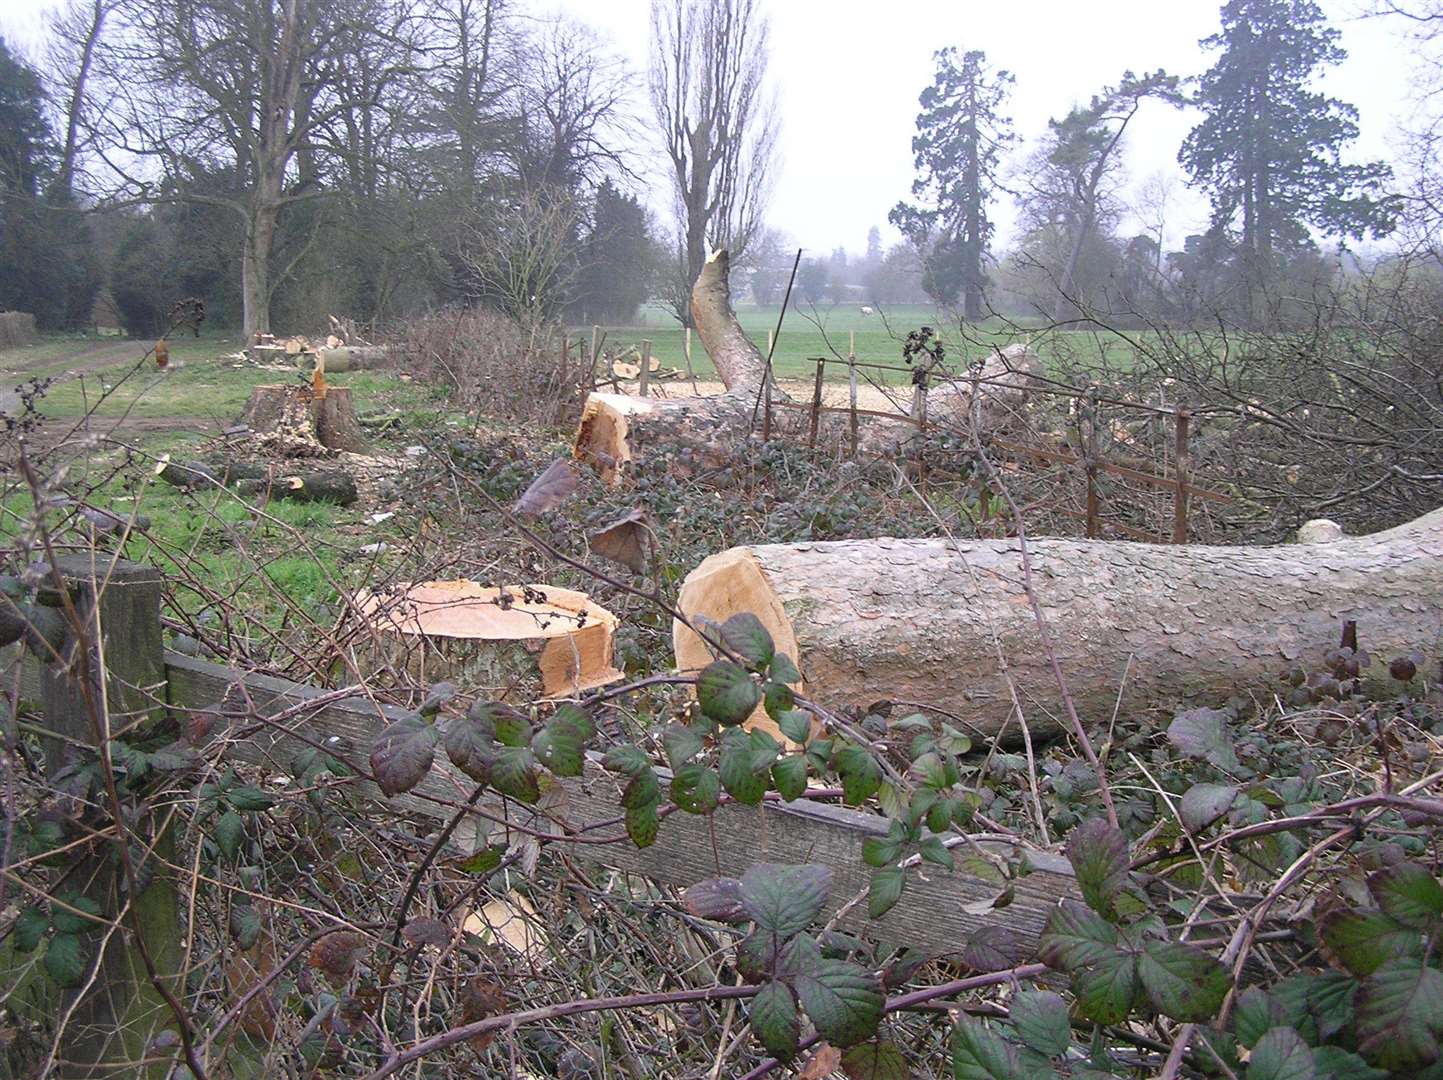 Mature trees were also felled to make way for the Leybourne/West Malling bypass. Images: Peter Cosier